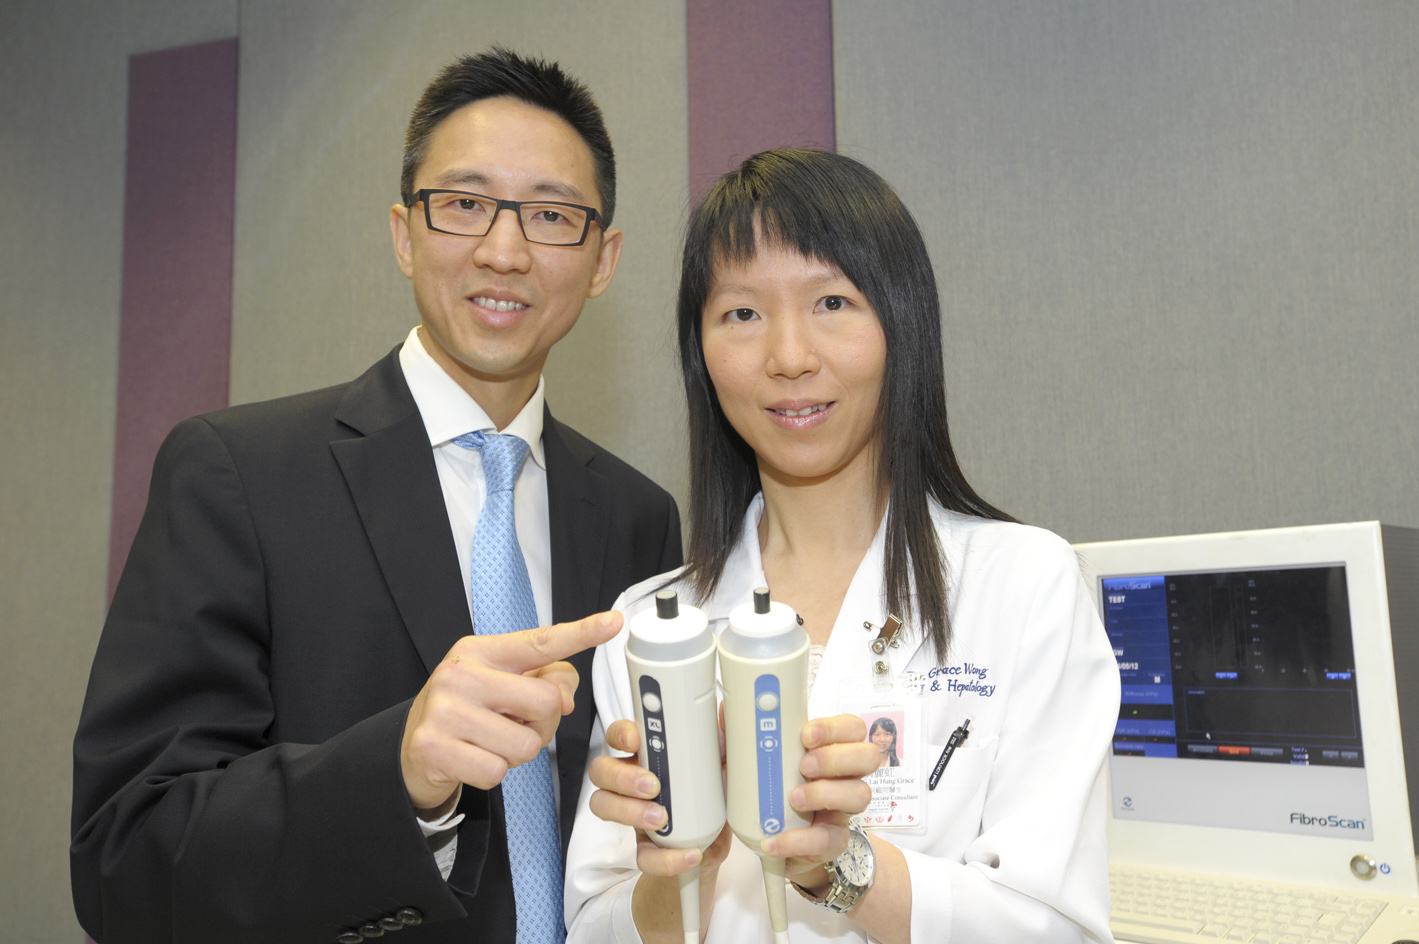 Prof. Chan Lik Yuen Henry and Prof. Wong Lai Hung Grace show the new XL probe (left) and the regujavascript:updateContent();lar M probe (right) of Fibroscan